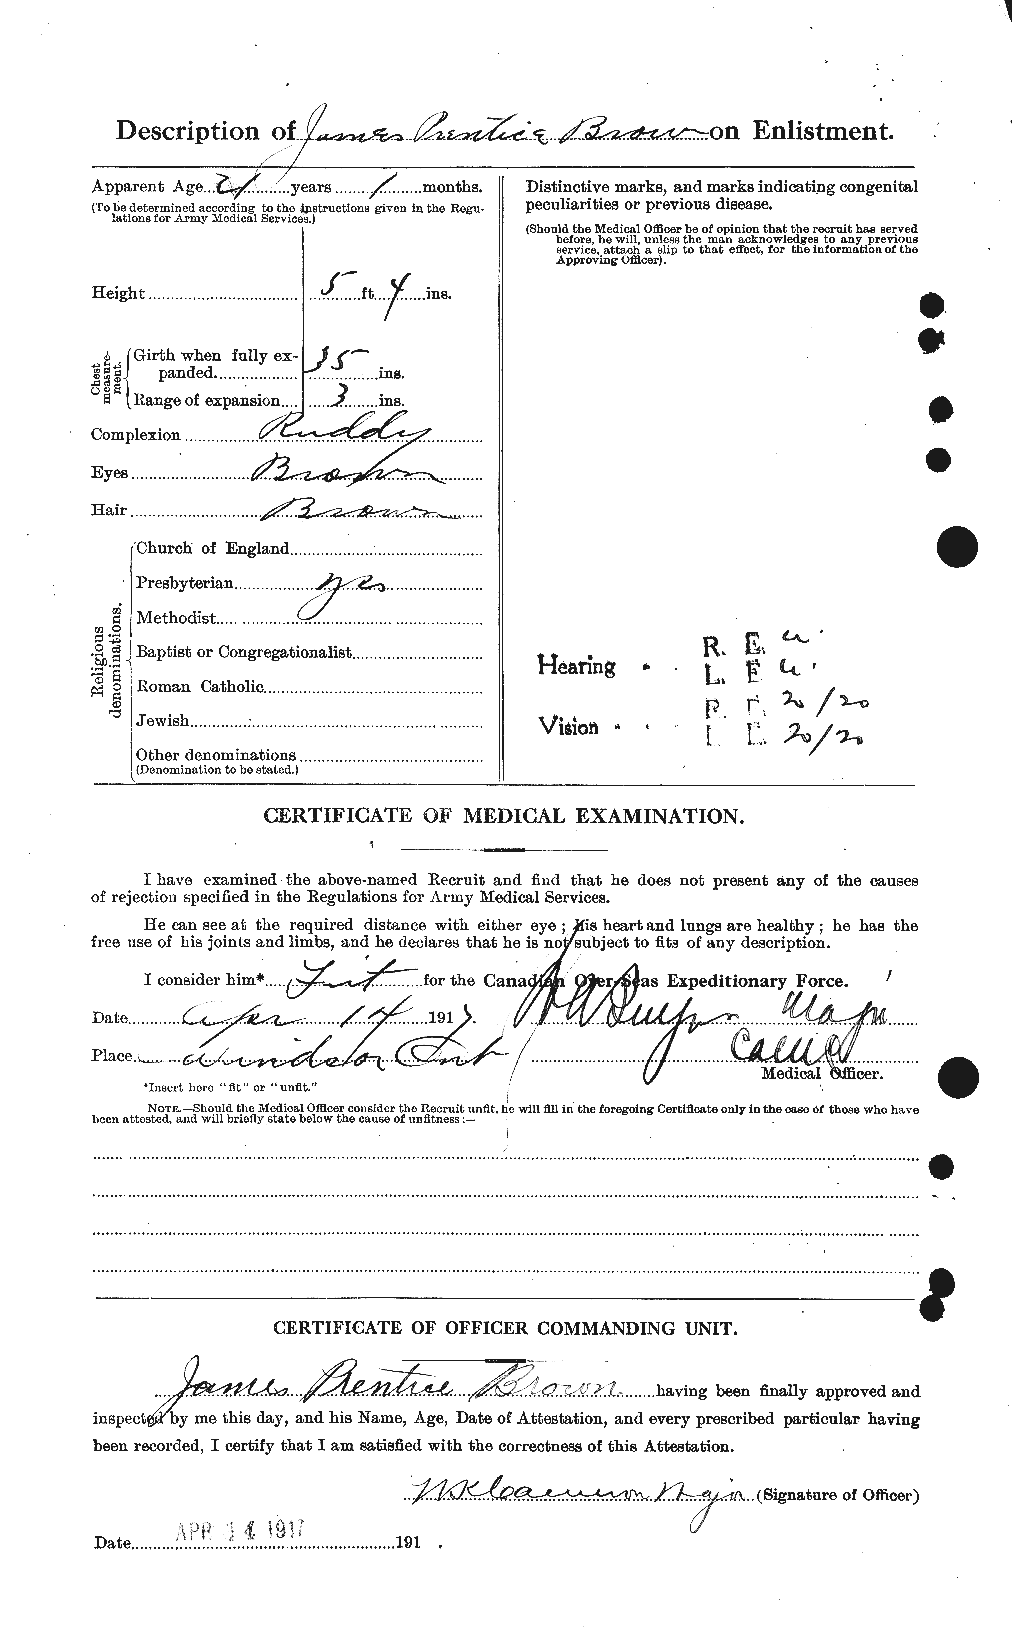 Personnel Records of the First World War - CEF 269571b